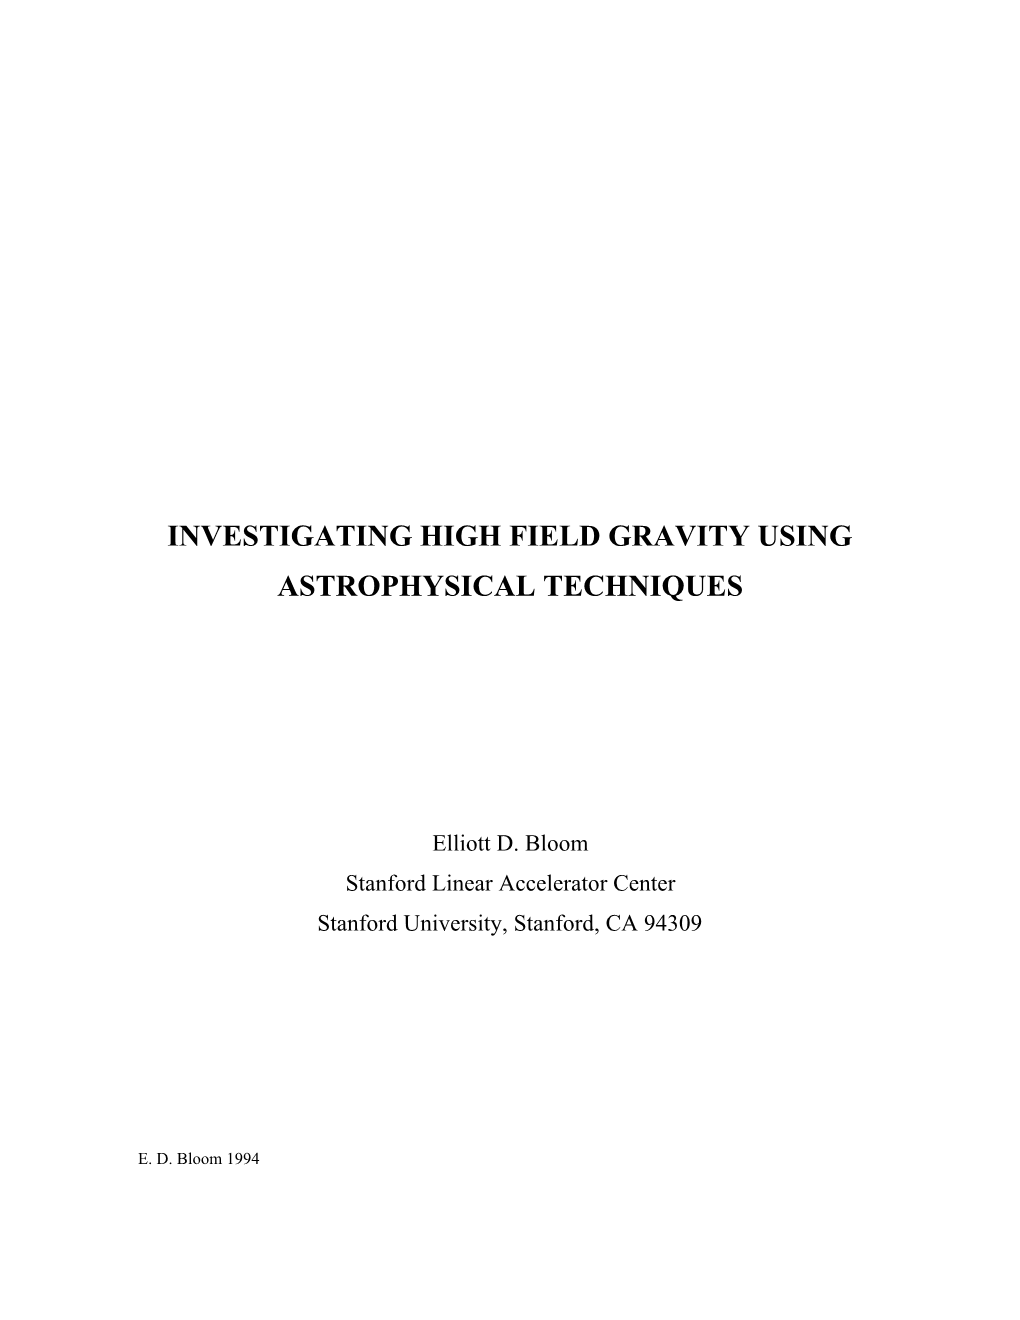 Investigating High Field Gravity Using Astrophysical Techniques